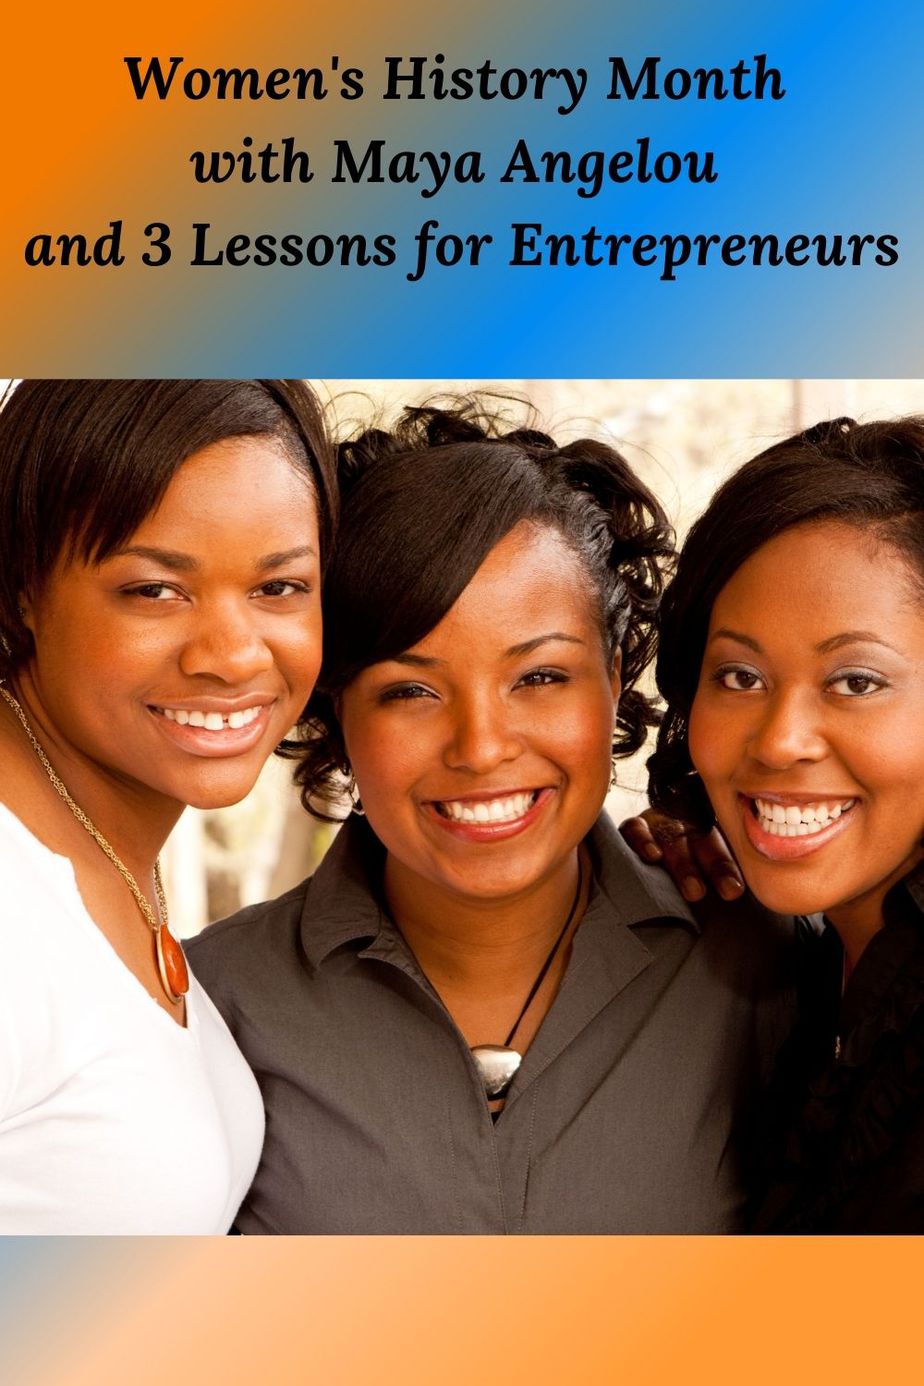 Women's History Month with Maya Angelou and 3 Lessons for Entrepreneurs